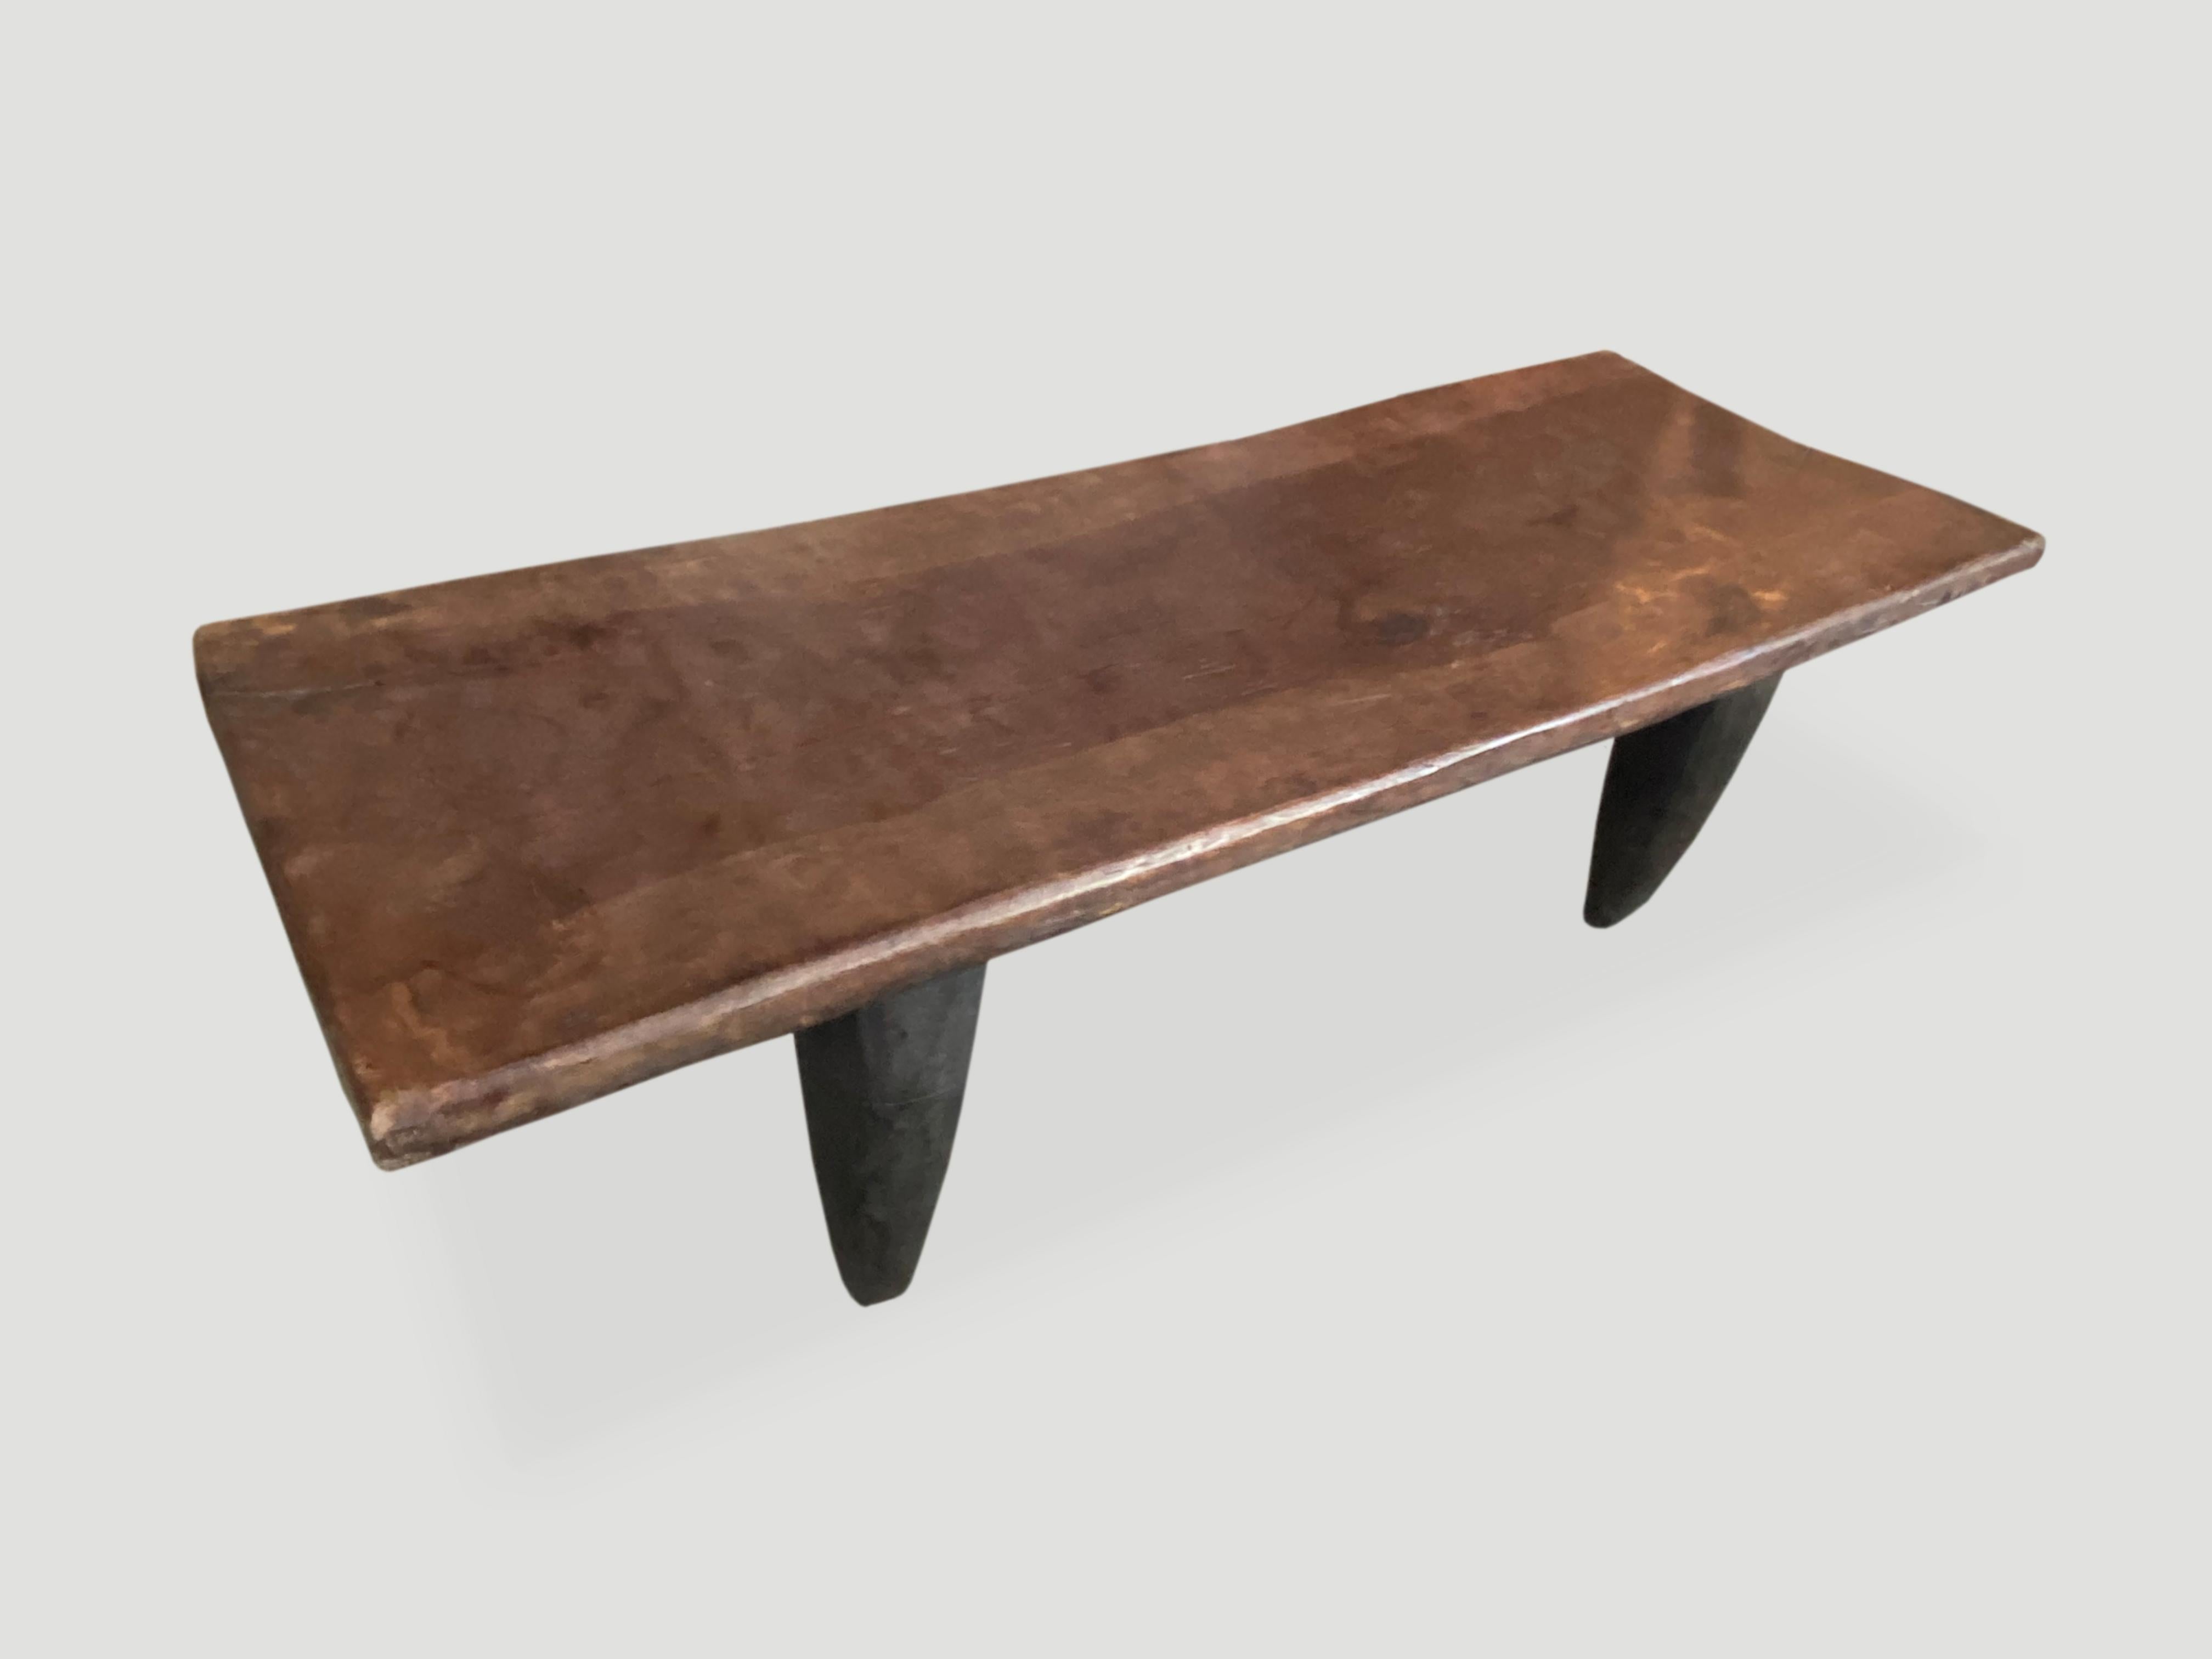 Antique bench or coffee table hand carved by the Senufo tribes from a single piece of iroko wood, native to the west coast of Africa. The wood is tough, dense and very durable. Shown with cone style legs.

This bench or coffee table was sourced in